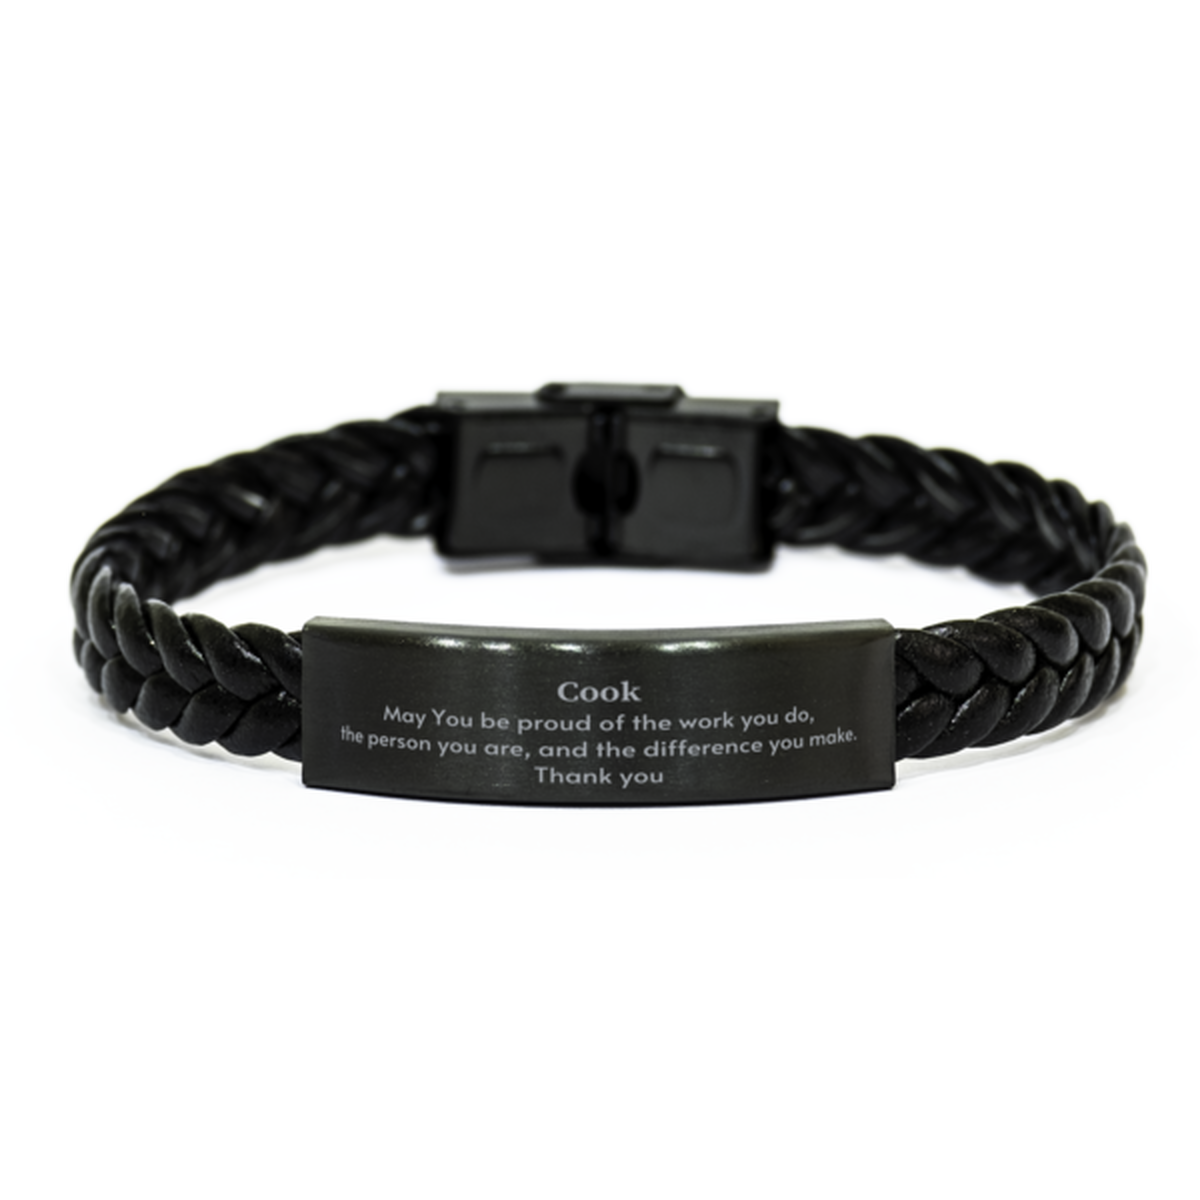 Heartwarming Braided Leather Bracelet Retirement Coworkers Gifts for Cook, Cook May You be proud of the work you do, the person you are Gifts for Boss Men Women Friends